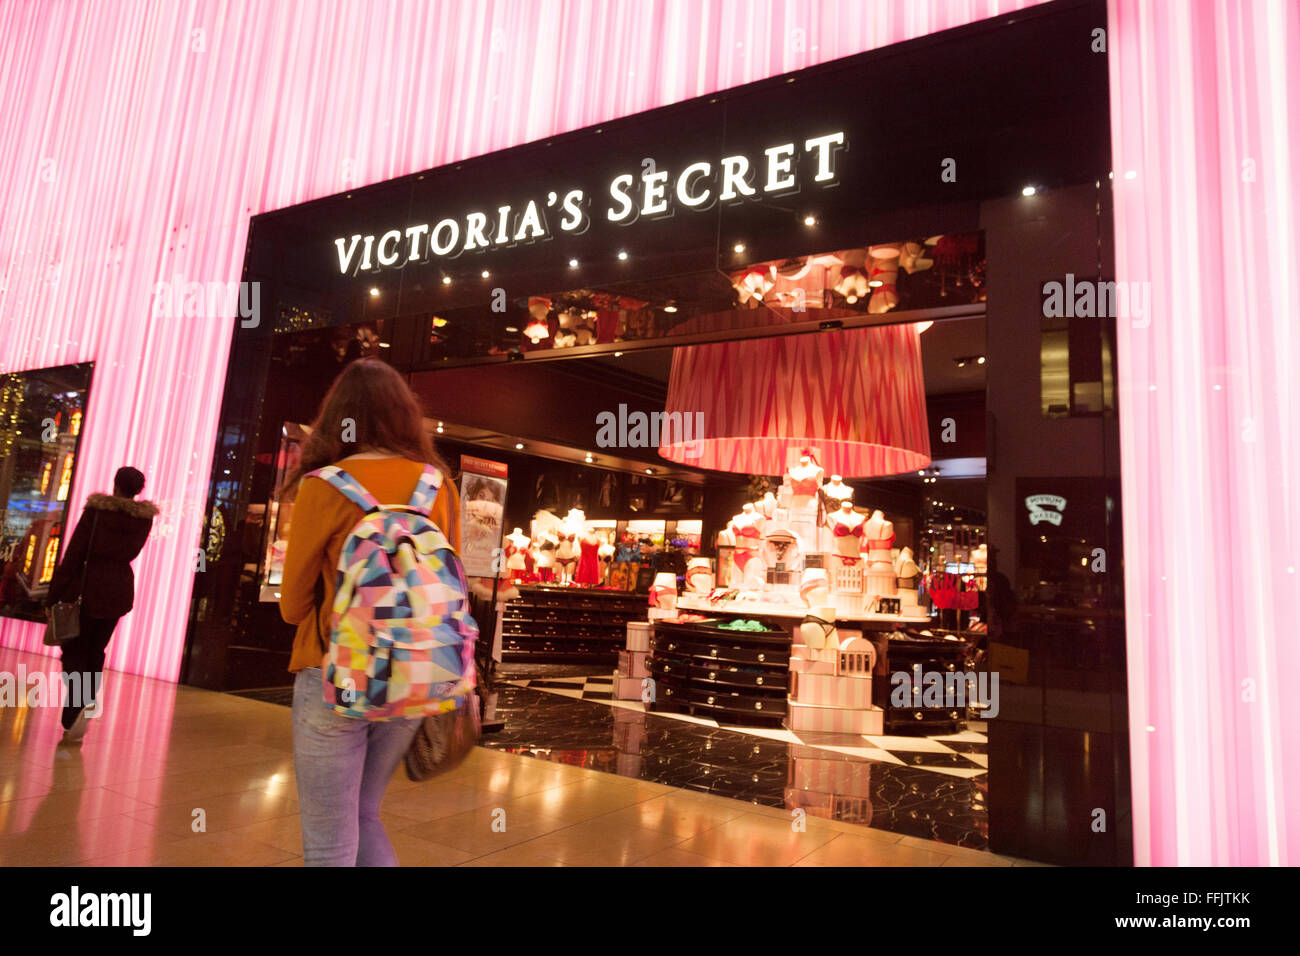 Victoria's Secret PINK Women's Apparel for sale in Rome, Italy